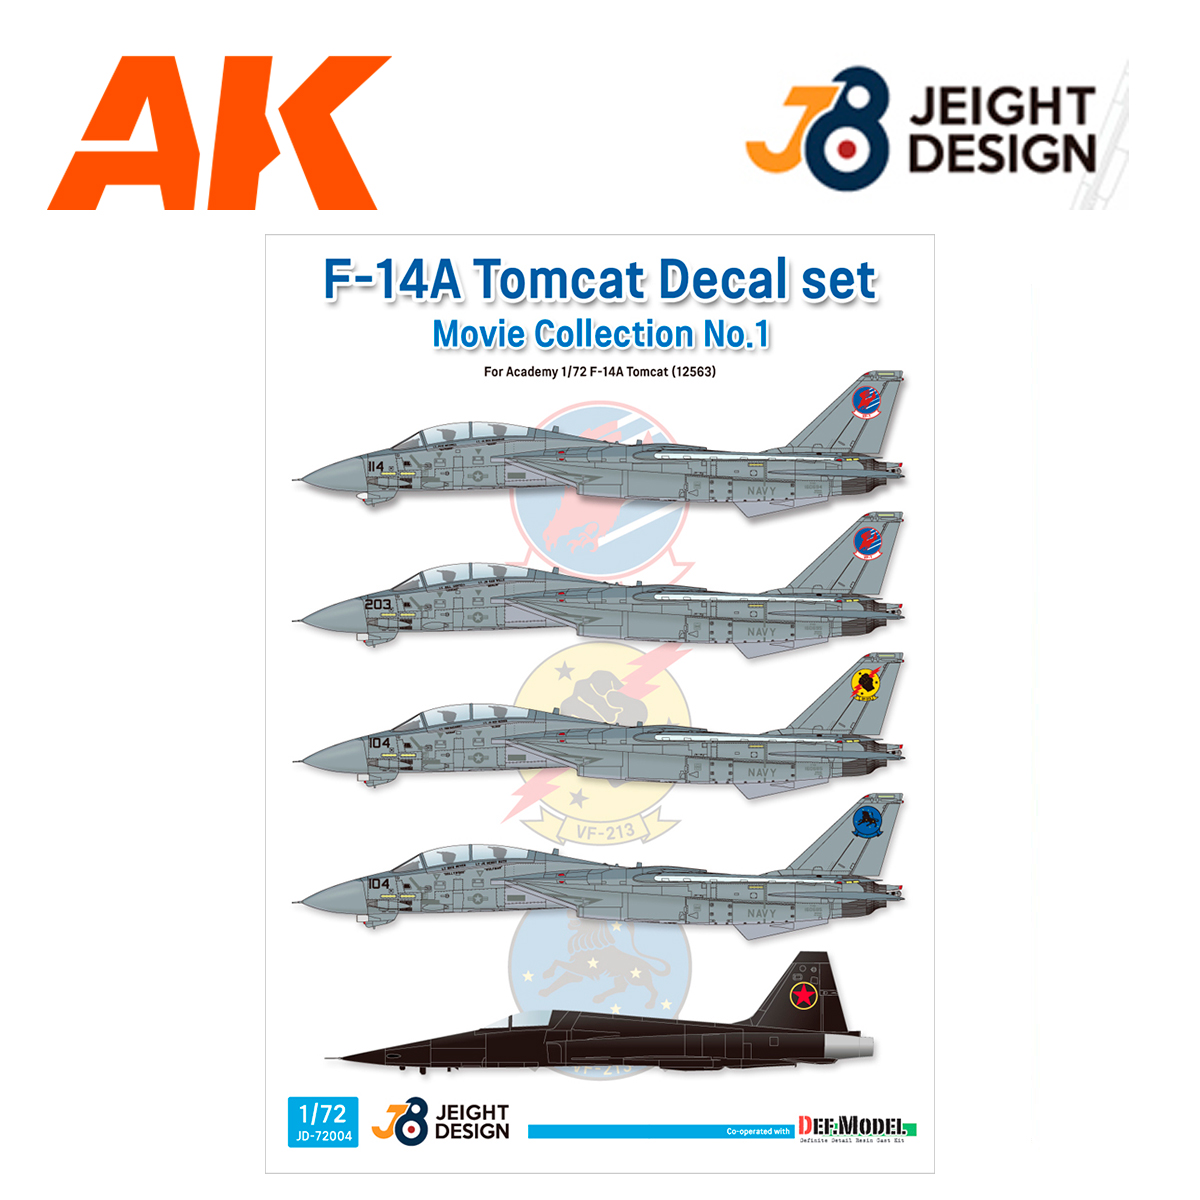 F-14A Tomcat Decal set – Movie Collection No.1